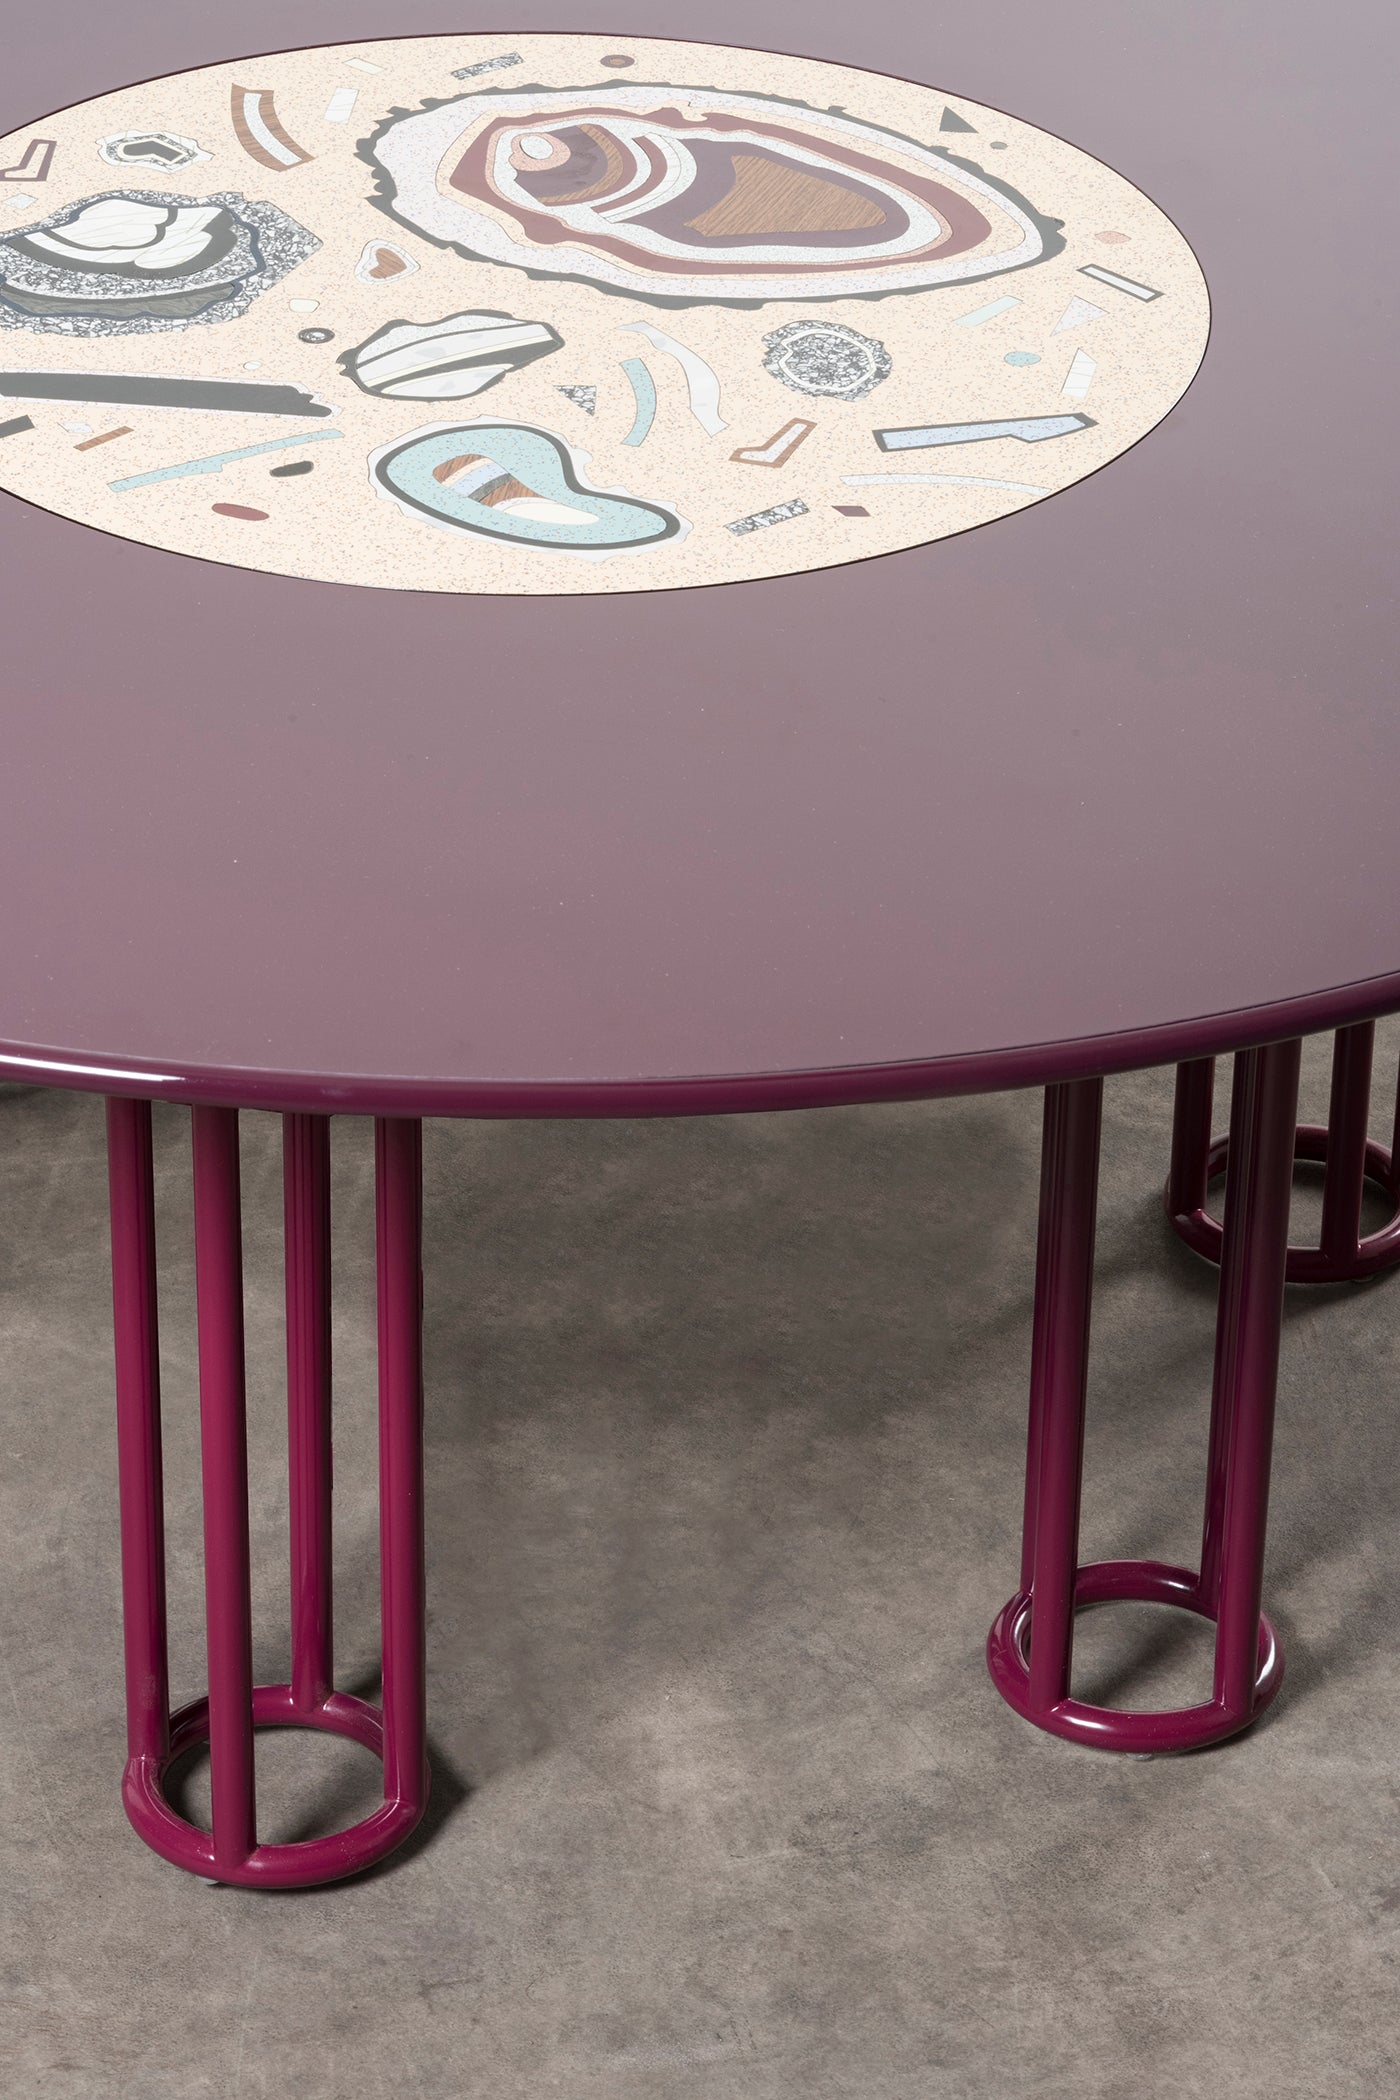 Low dining table with Lazy Susan